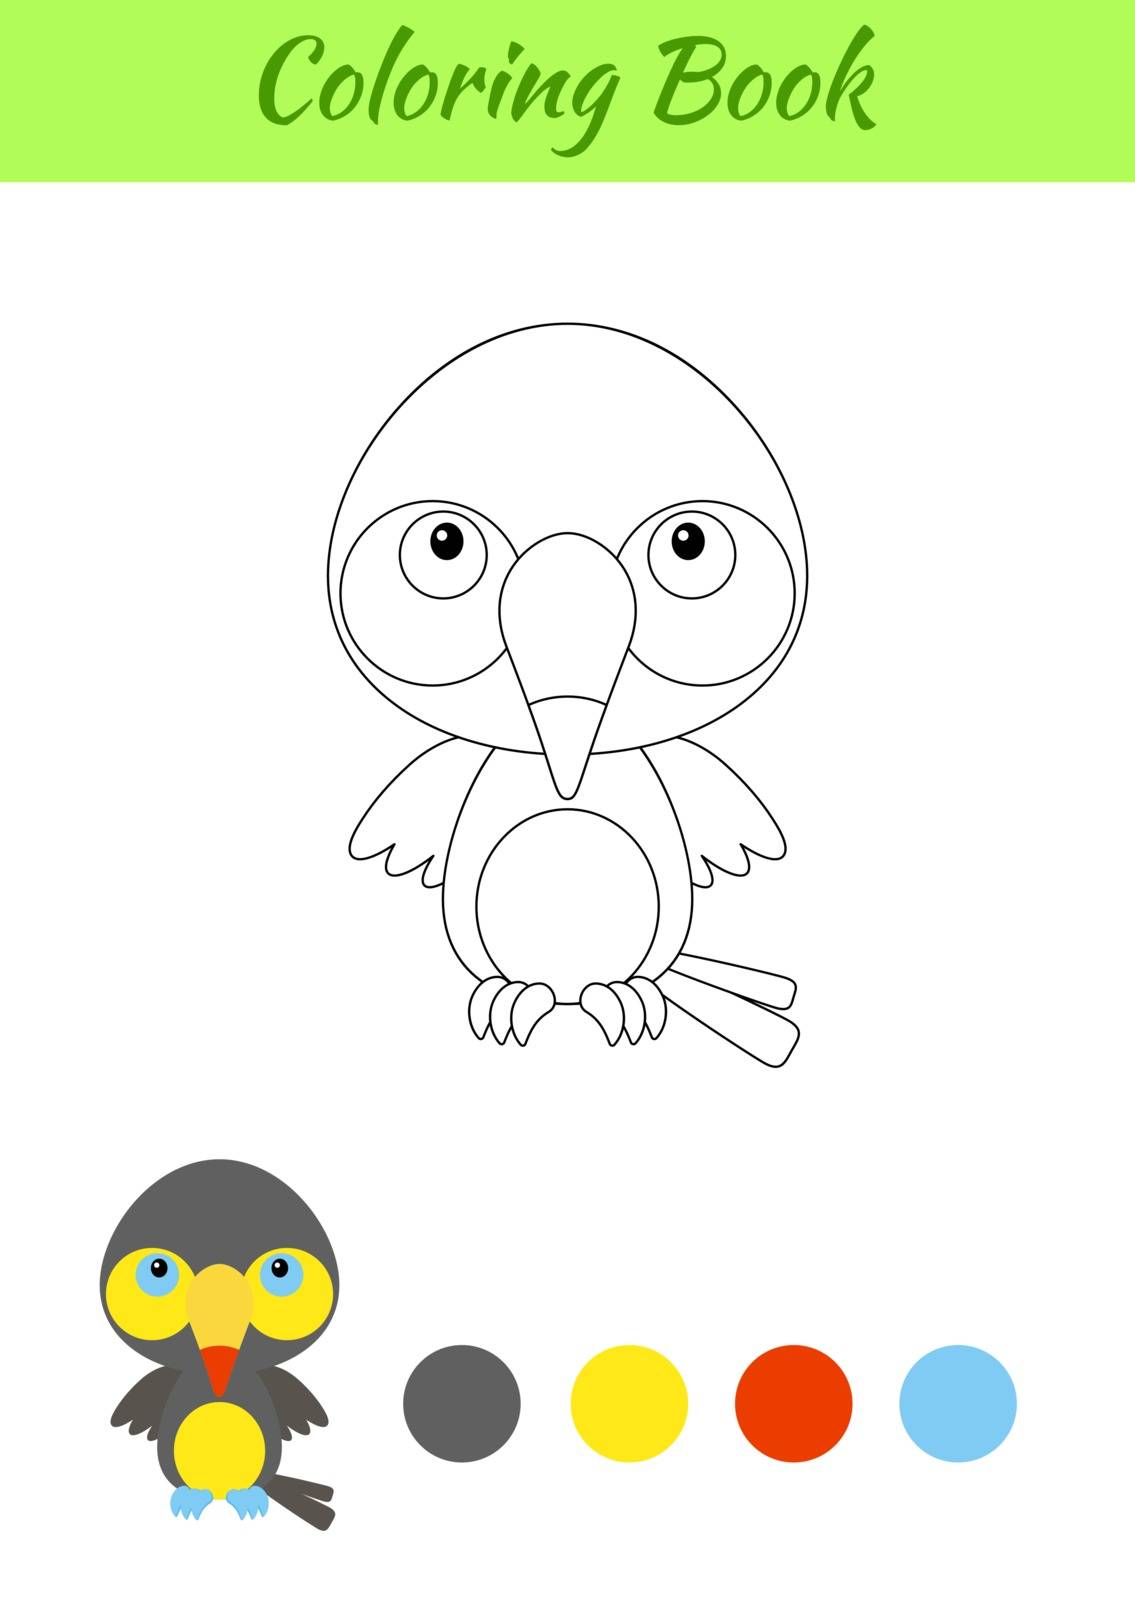 Coloring page happy little baby toucan. Printable coloring book  by Melnyk